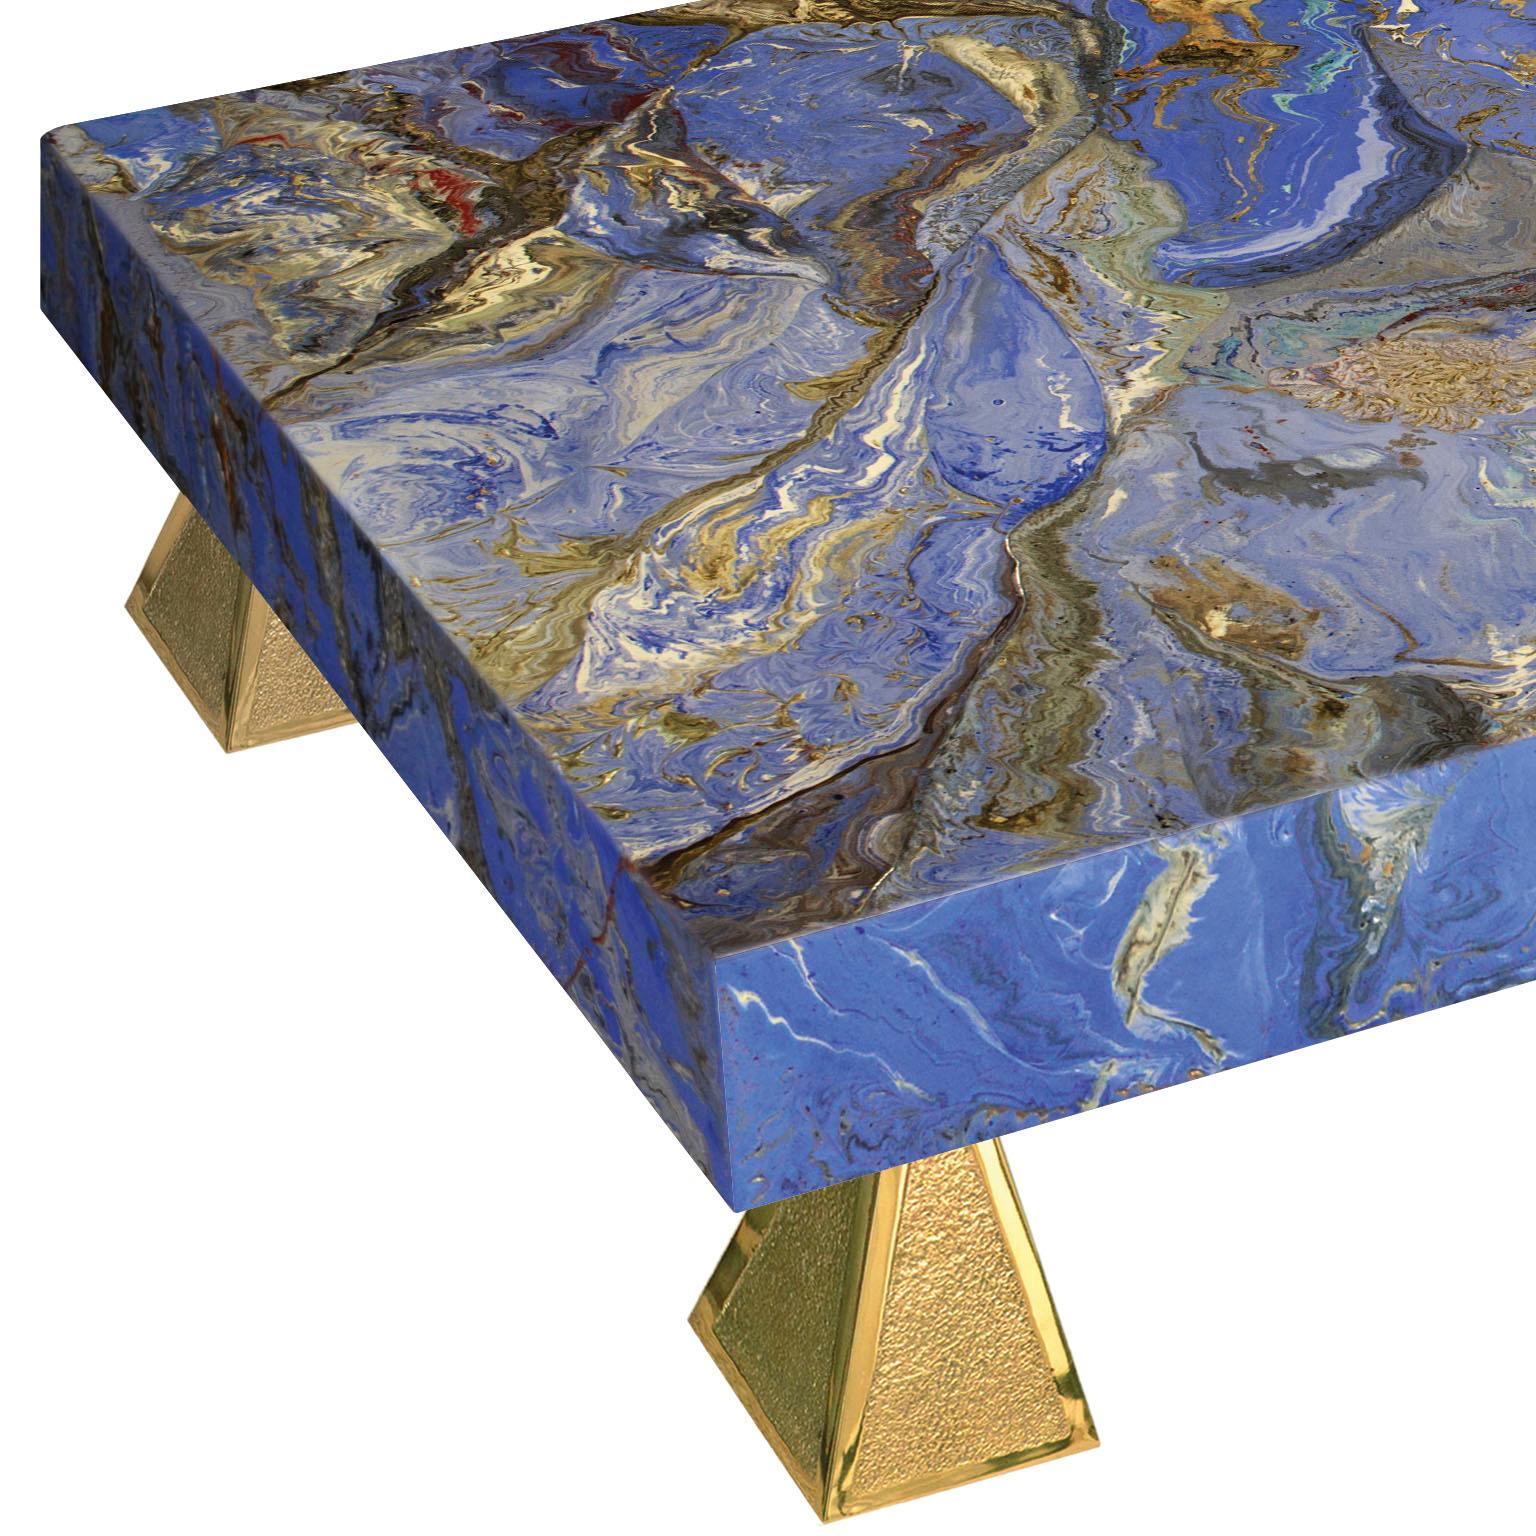 In Cobalto coffee table our purpose is to show the new concept of the scagliola art giving emphasize to explosion of colors and the texture of the “materia “.
Our artist creativity is highlighted using different stylish metals that give character to